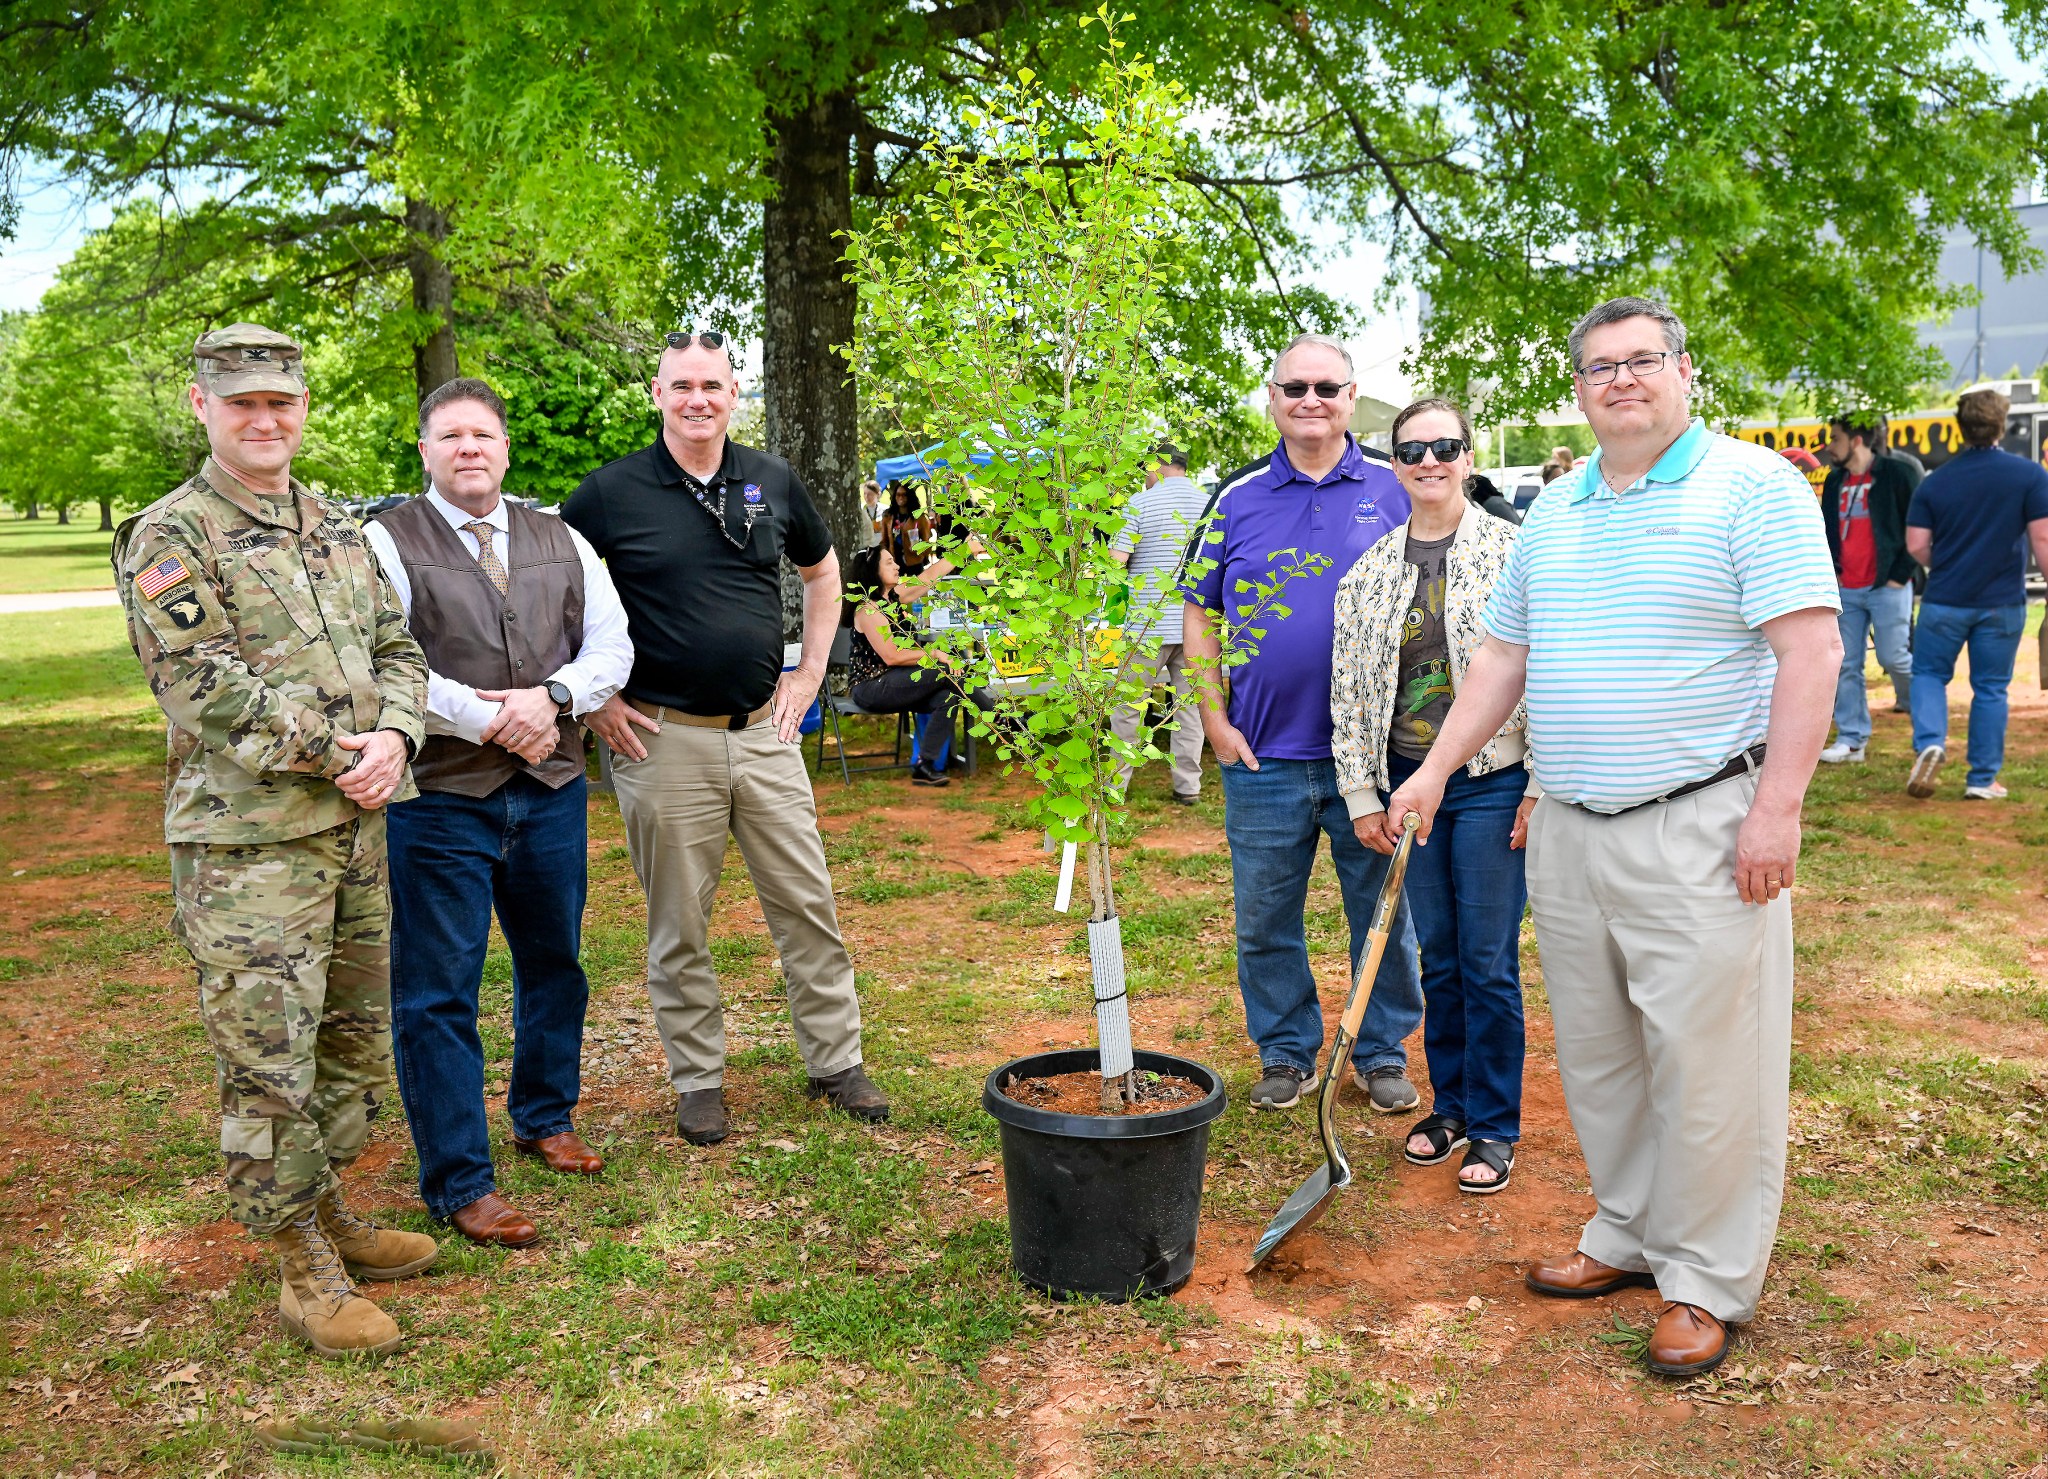 Redstone Arsenal and Marshall Space Flight Center leaders stand beside a carefully selected Ginkgo tree during Earth Day activities April 25 at Marshall’s food truck corral. The “Autumn Gold” Ginkgo will grow behind the Medical Center at Building 4249 as a living reminder of Marshall’s commitment to sustainability and environmental stewardship. From left, Redstone Arsenal Garrison Commander Col. Brian Cozine; Deputy Garrison Commander Martin Traylor; Deputy Director of Marshall’s Office of Center Operations Bill Marks; Environmental Engineering and Occupational Health Manager Farley Davis; Director of Center Operations June Malone; and Associate Center Director, Technical, Larry Leopard.